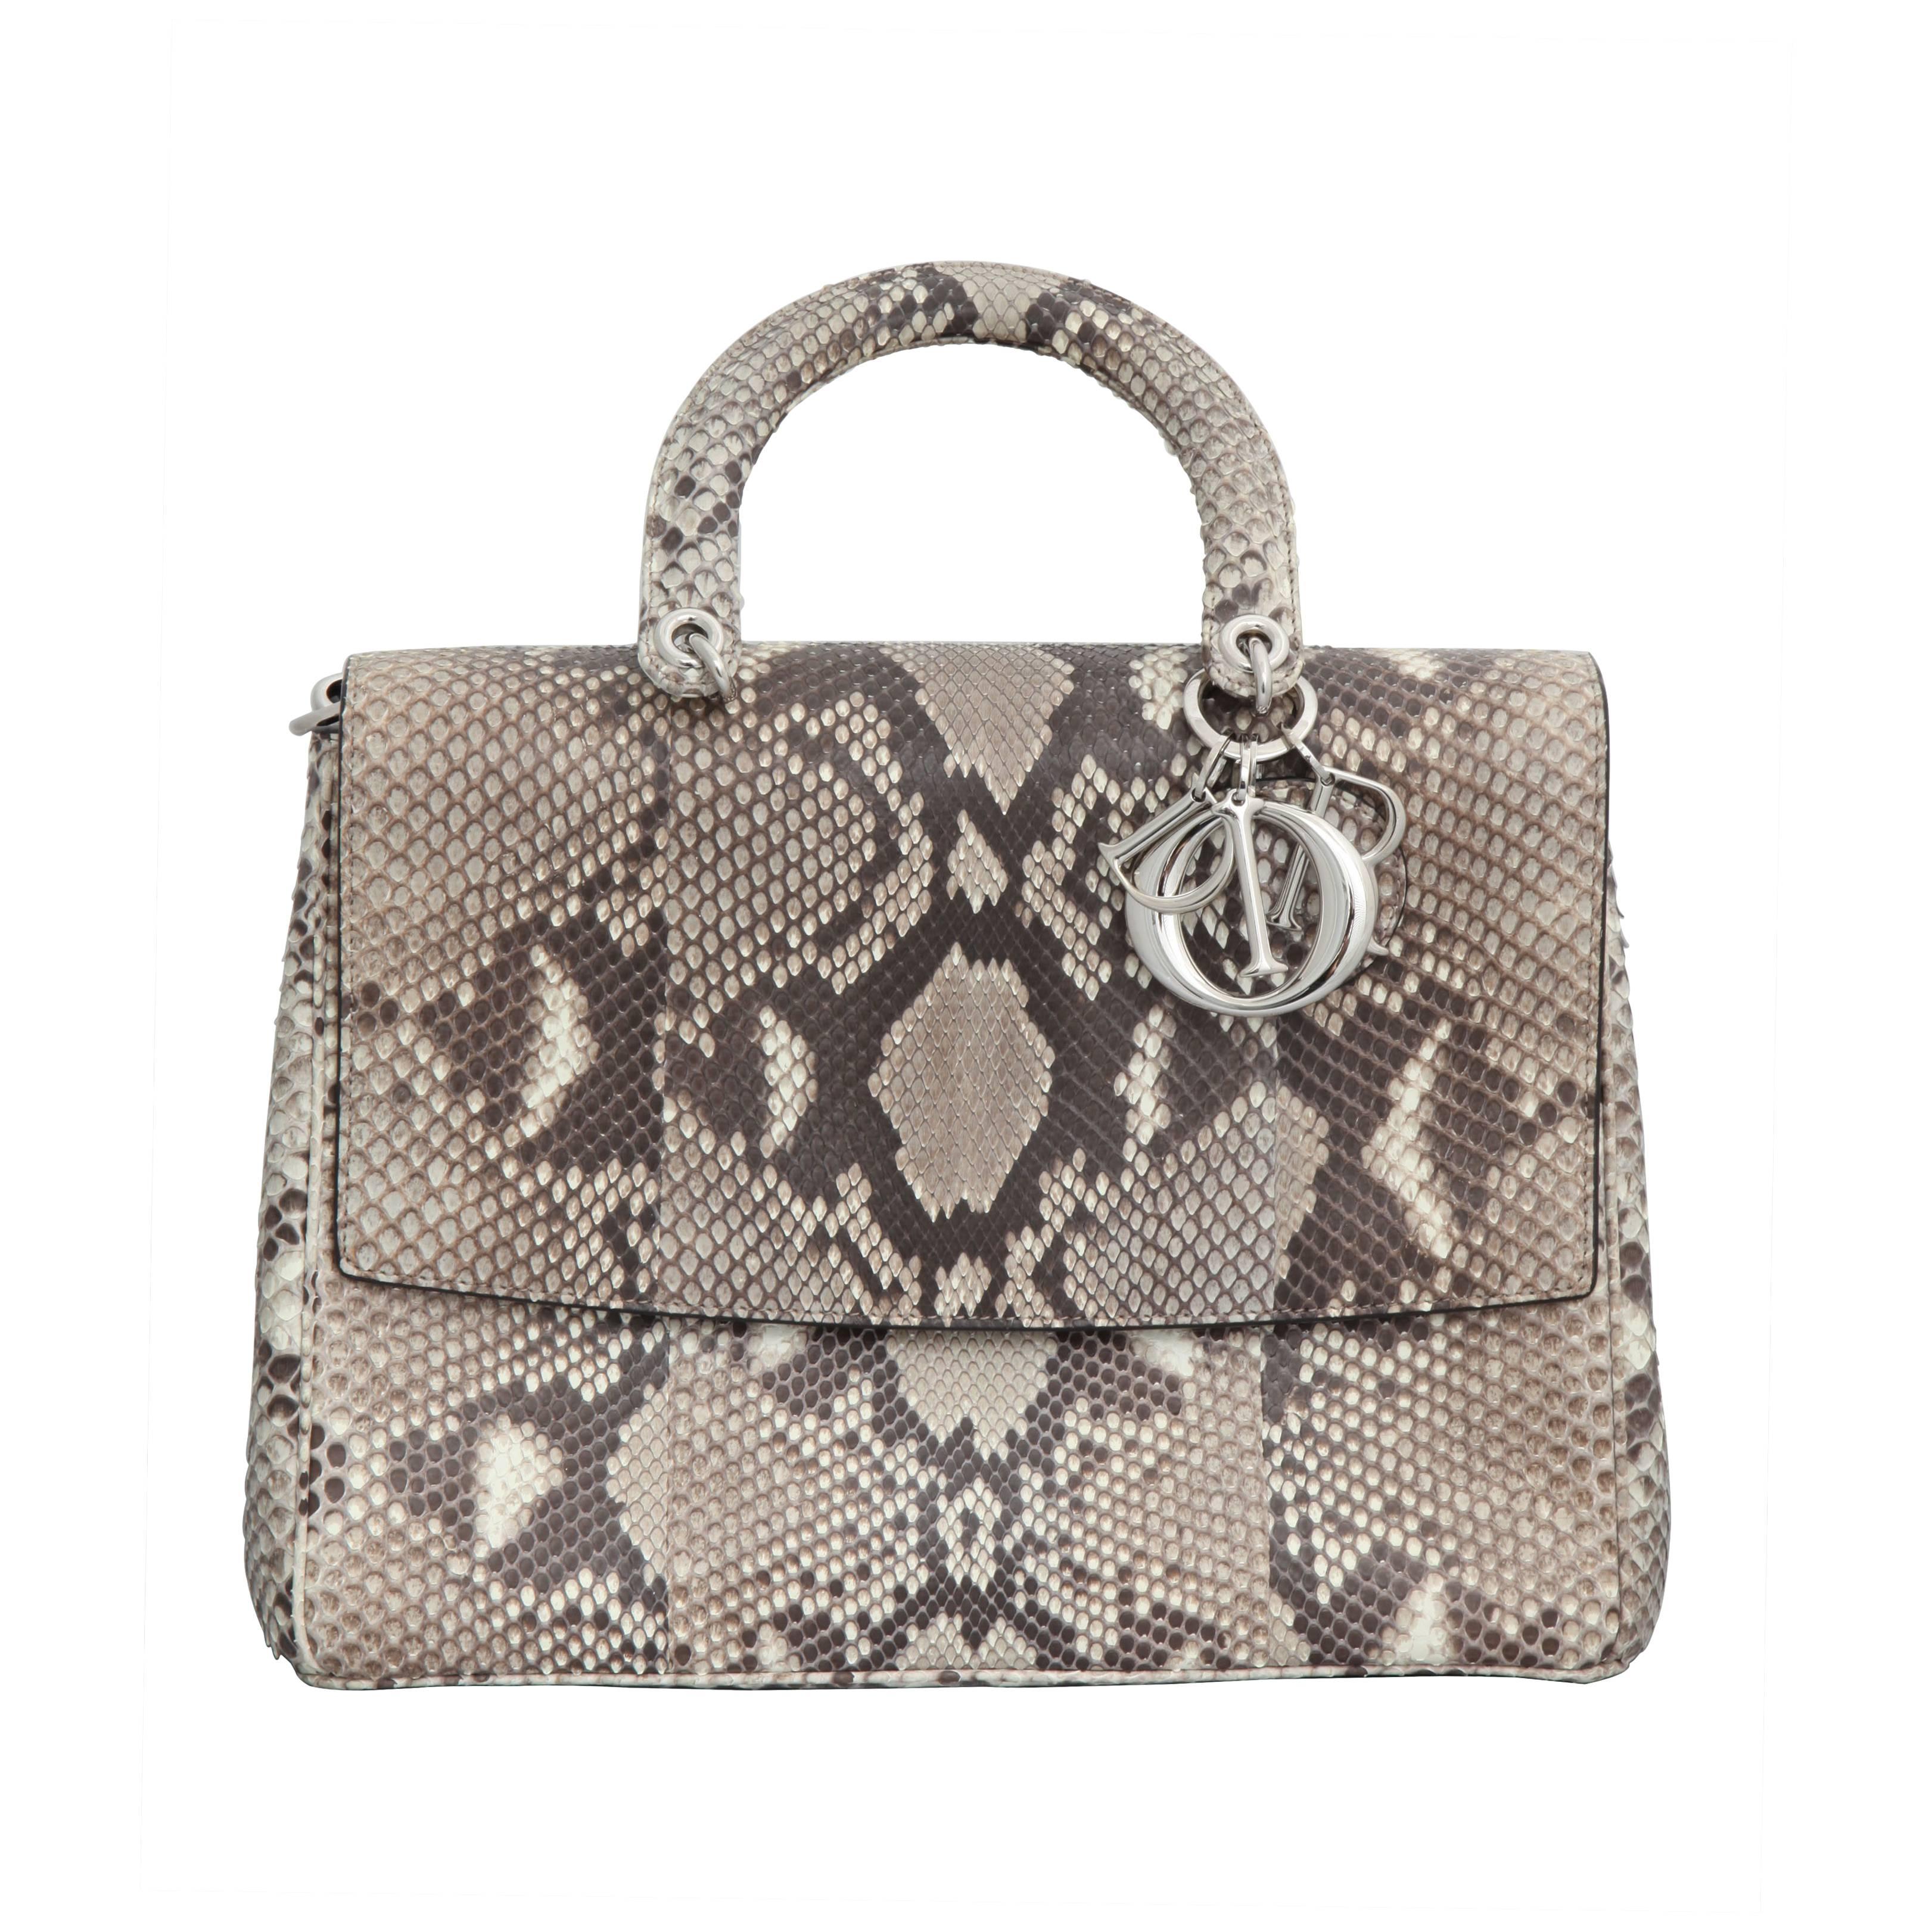 Amazing Christian Dior Python 'Be Dior" Bag New in Box For Sale